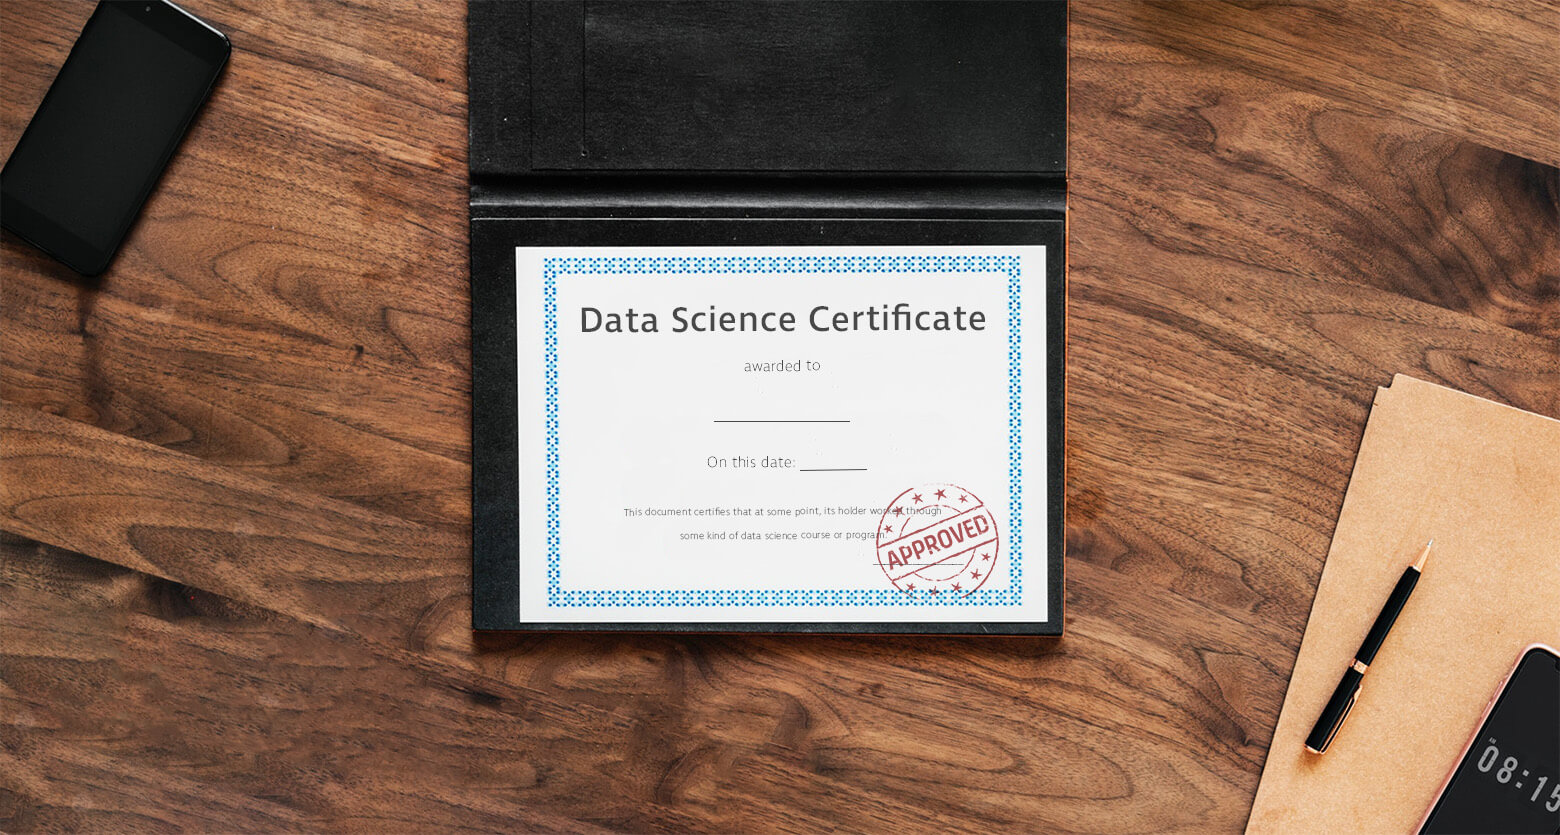 UVI Launches Data Science Certificate Program For Professionals In Fall 2021